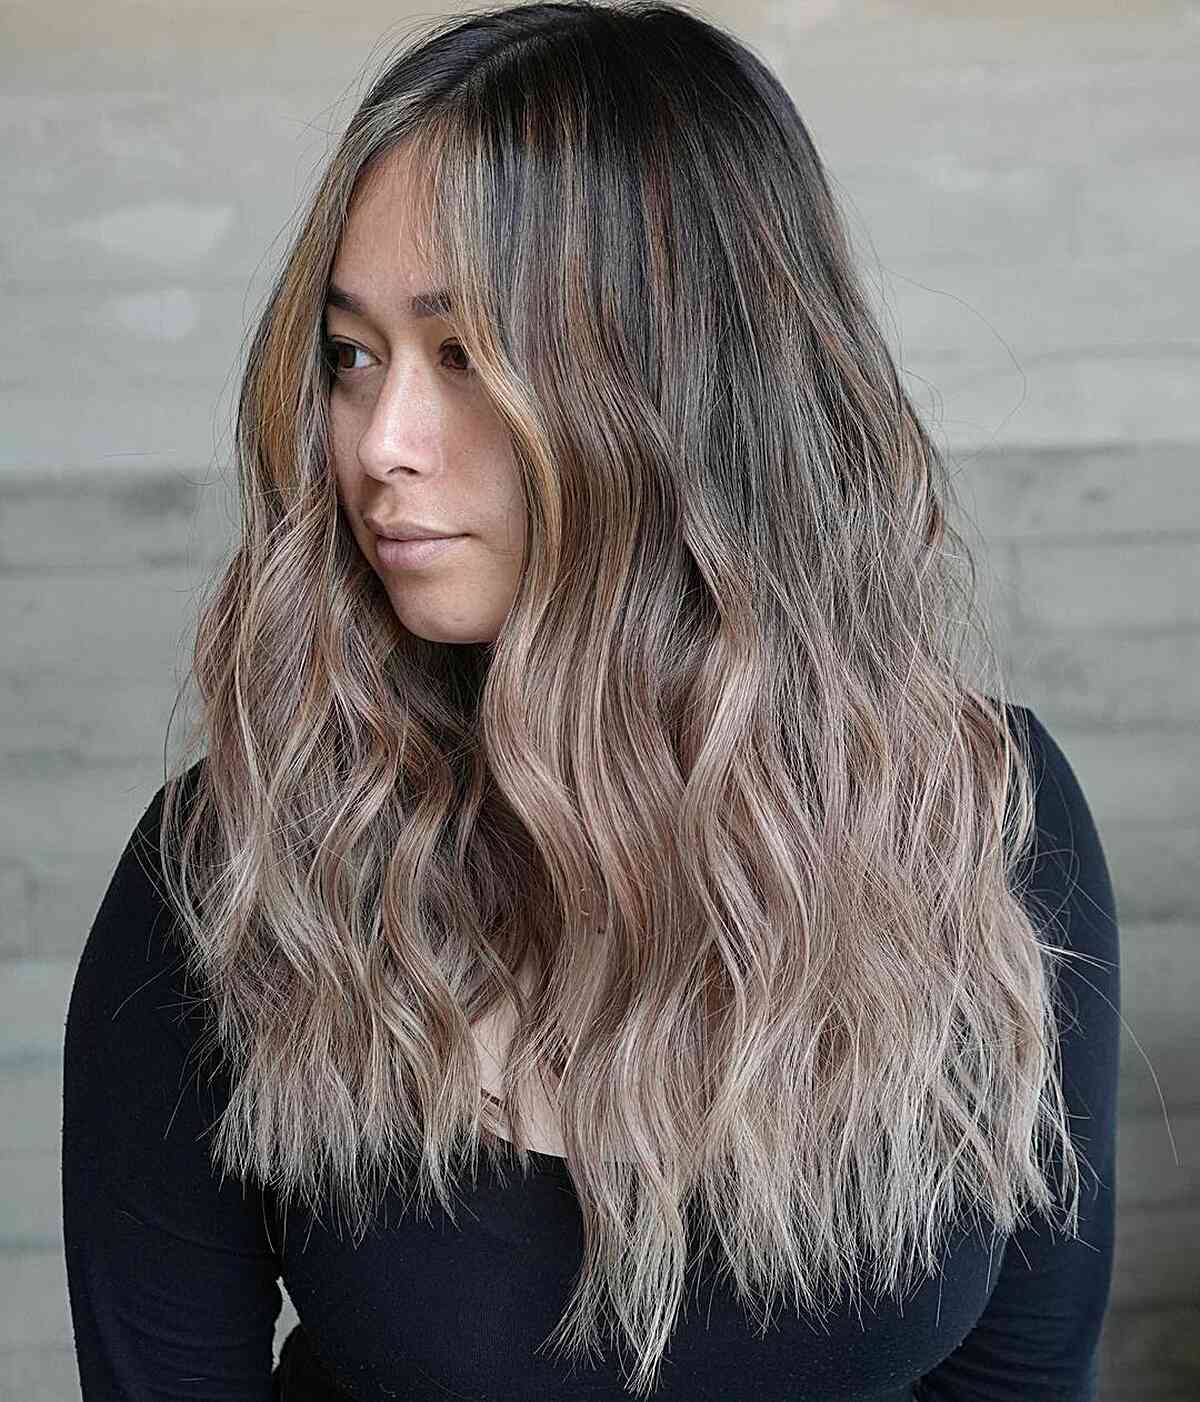 Mid-Long Mushroom Bronde Ombre Balayage Hair with Money Piece and Beach Waves